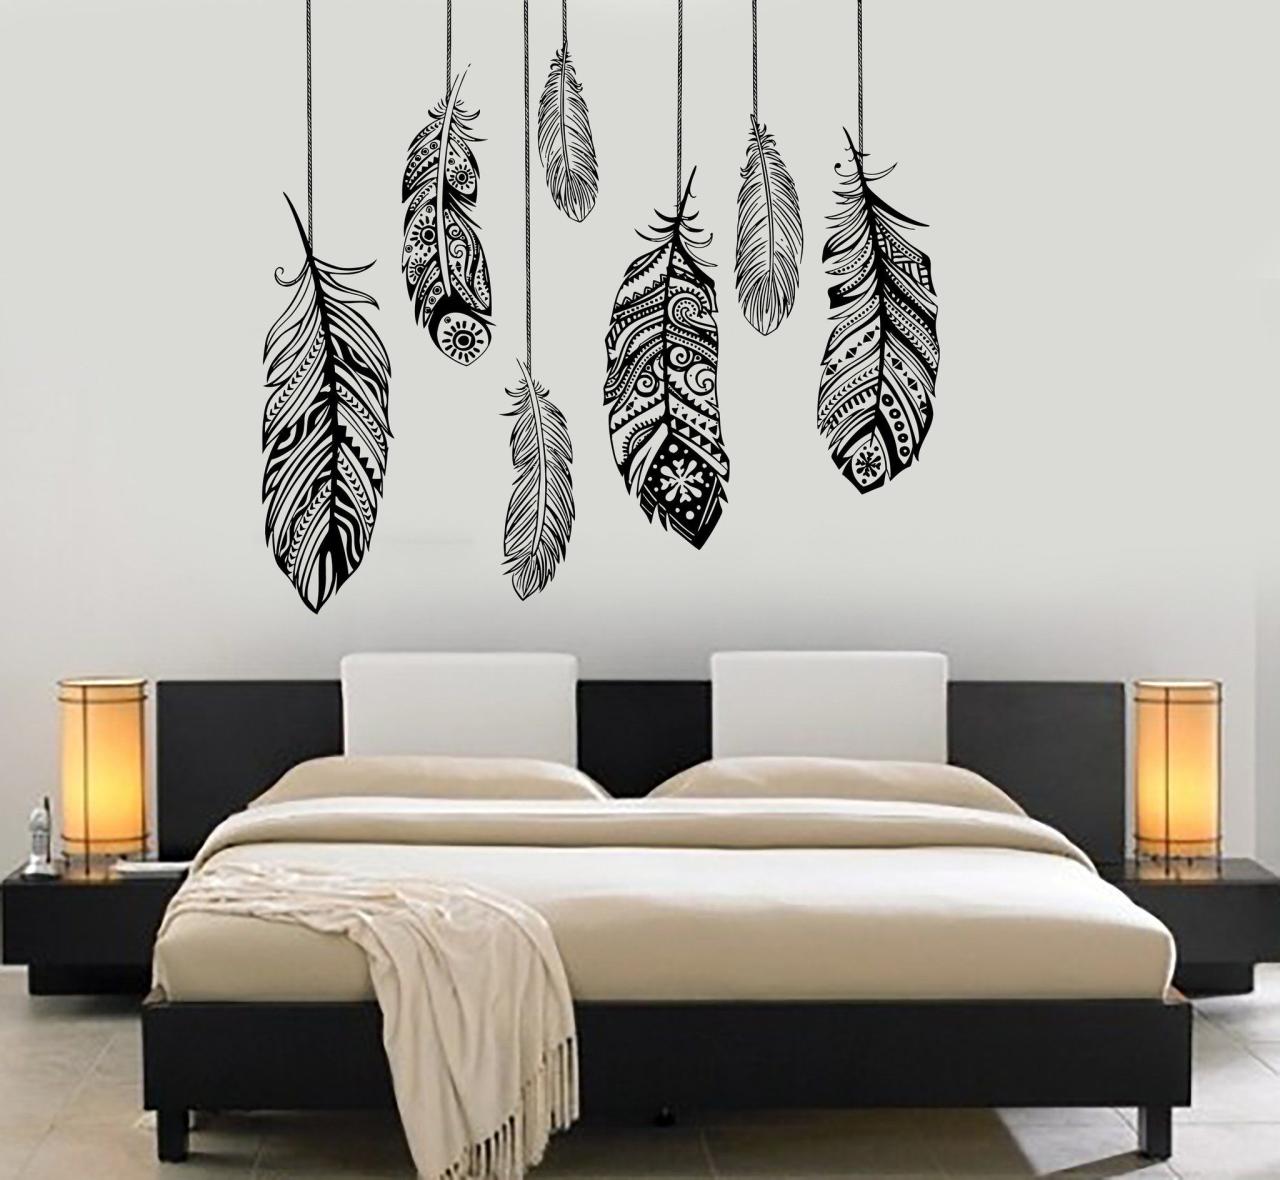 Artistic Expression: Unique and Personalized Bedroom Decor